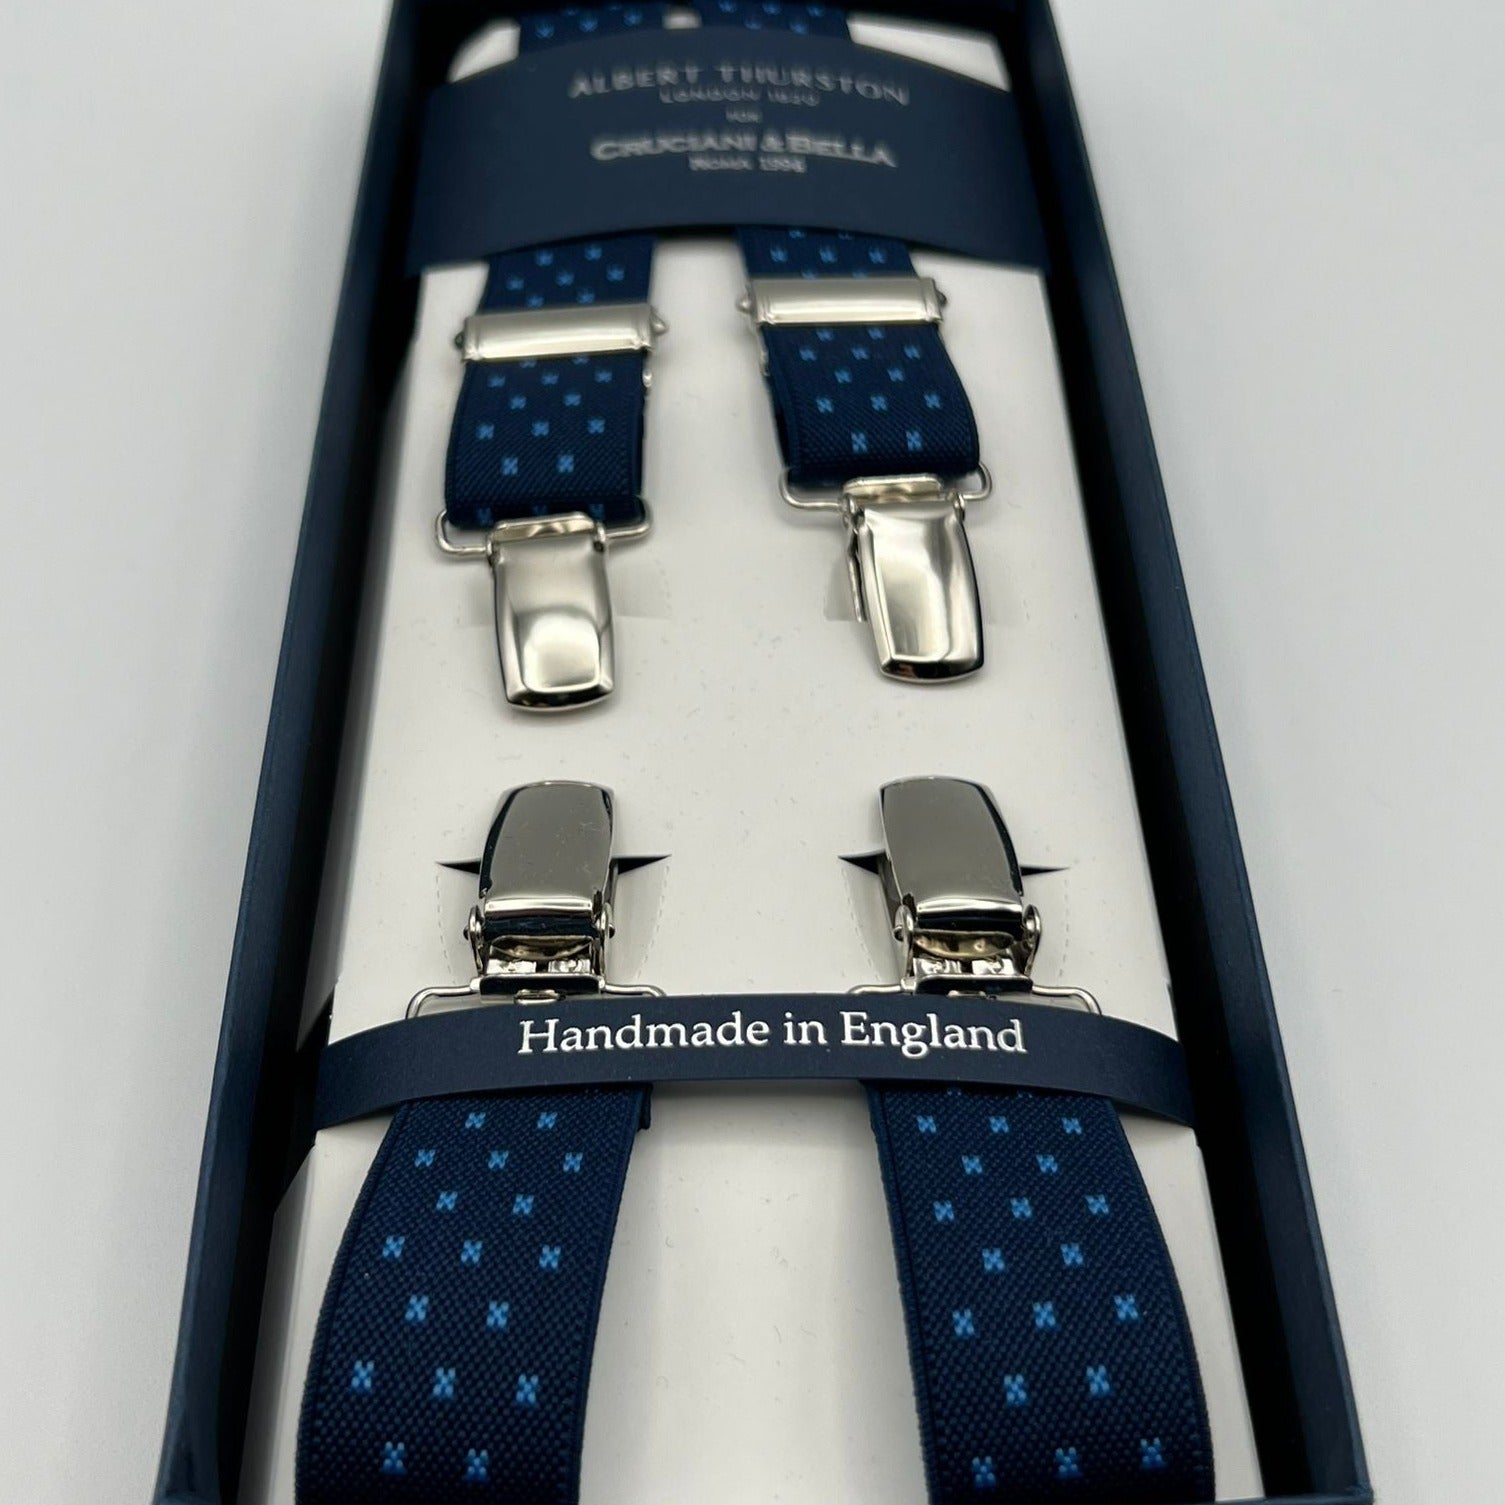 Albert Thurston for Cruciani & Bella Made in England Clip on Adjustable Sizing 25 mm elastic braces Blue, Light Blue Motif X-Shaped Nickel Fittings Size: L #7379